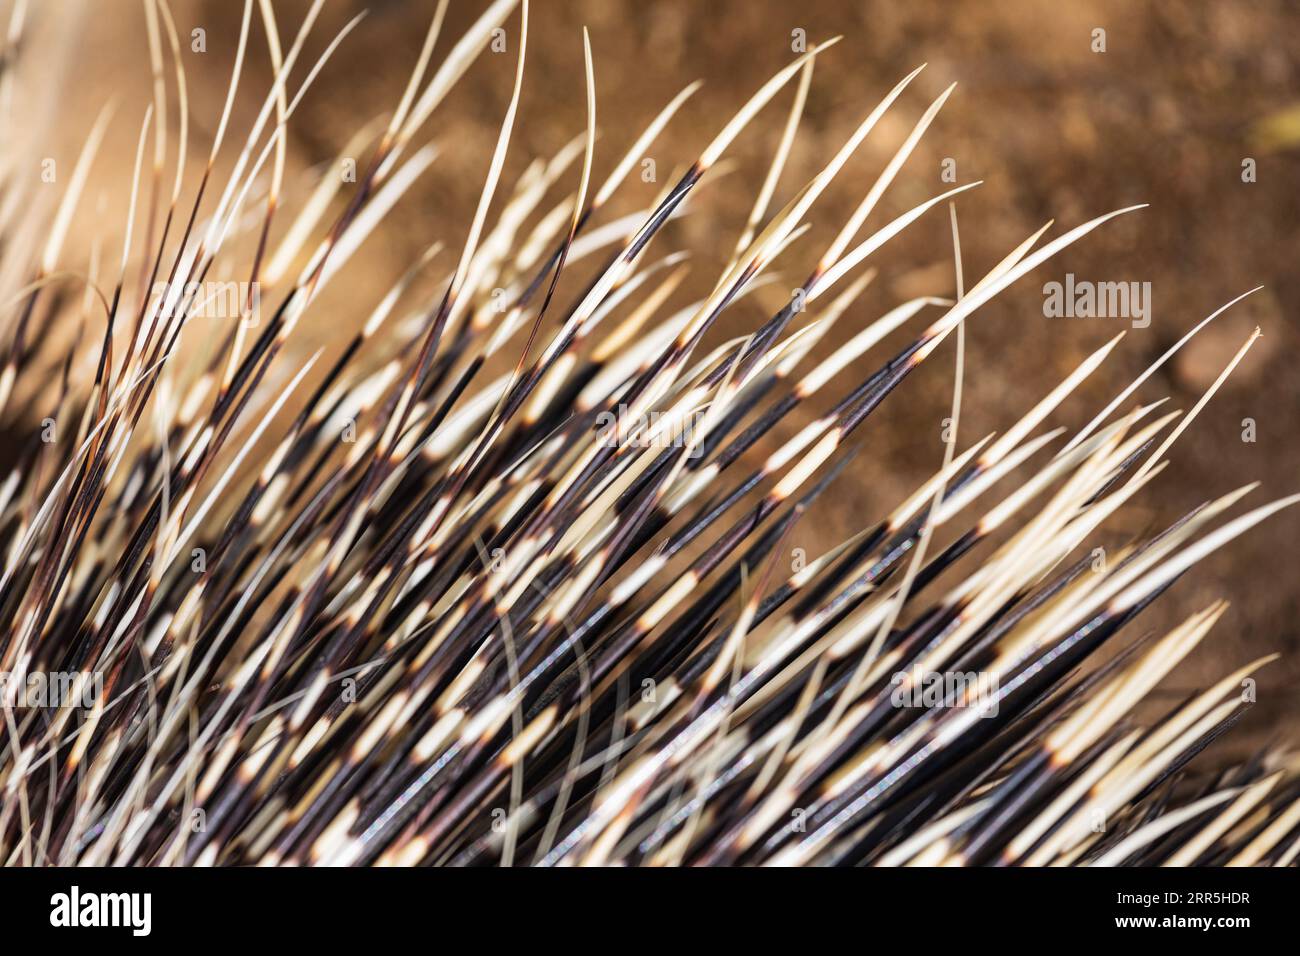 Indian Wells, California, USA. Close up of porcupine quills. Stock Photo